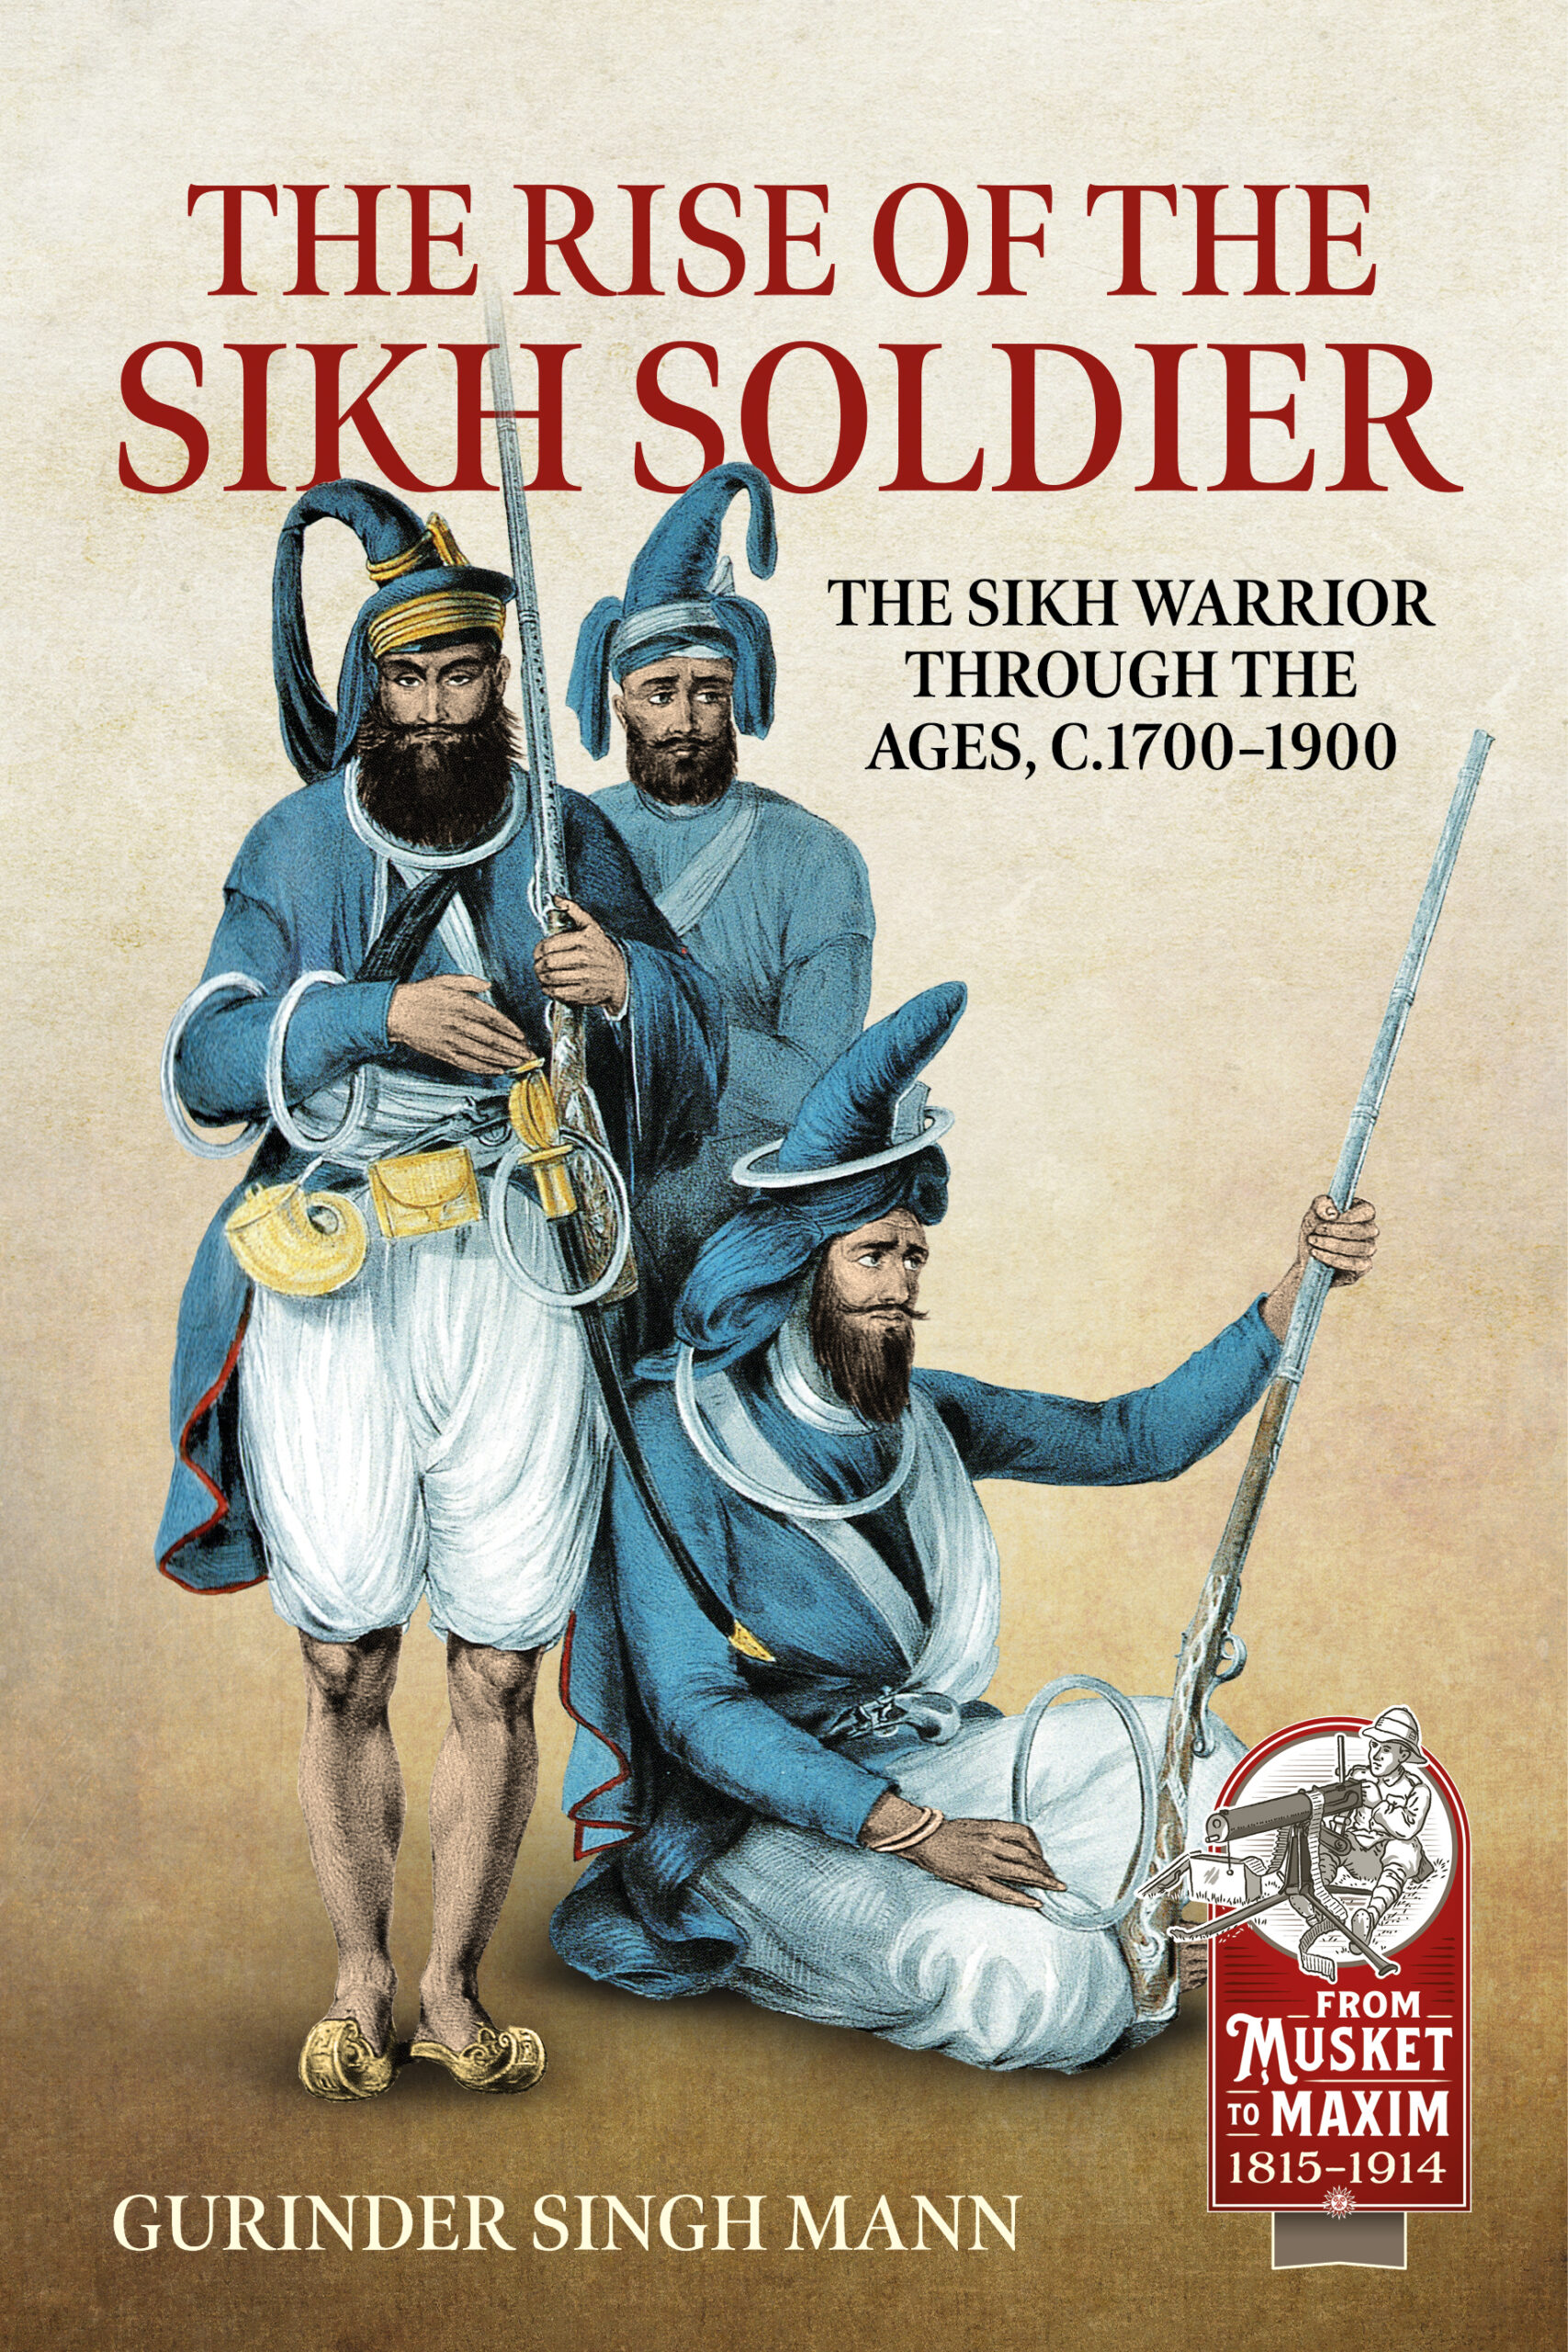 The Rise of the Sikh Soldier: The Sikh Warrior Through the Ages, C1700-1900